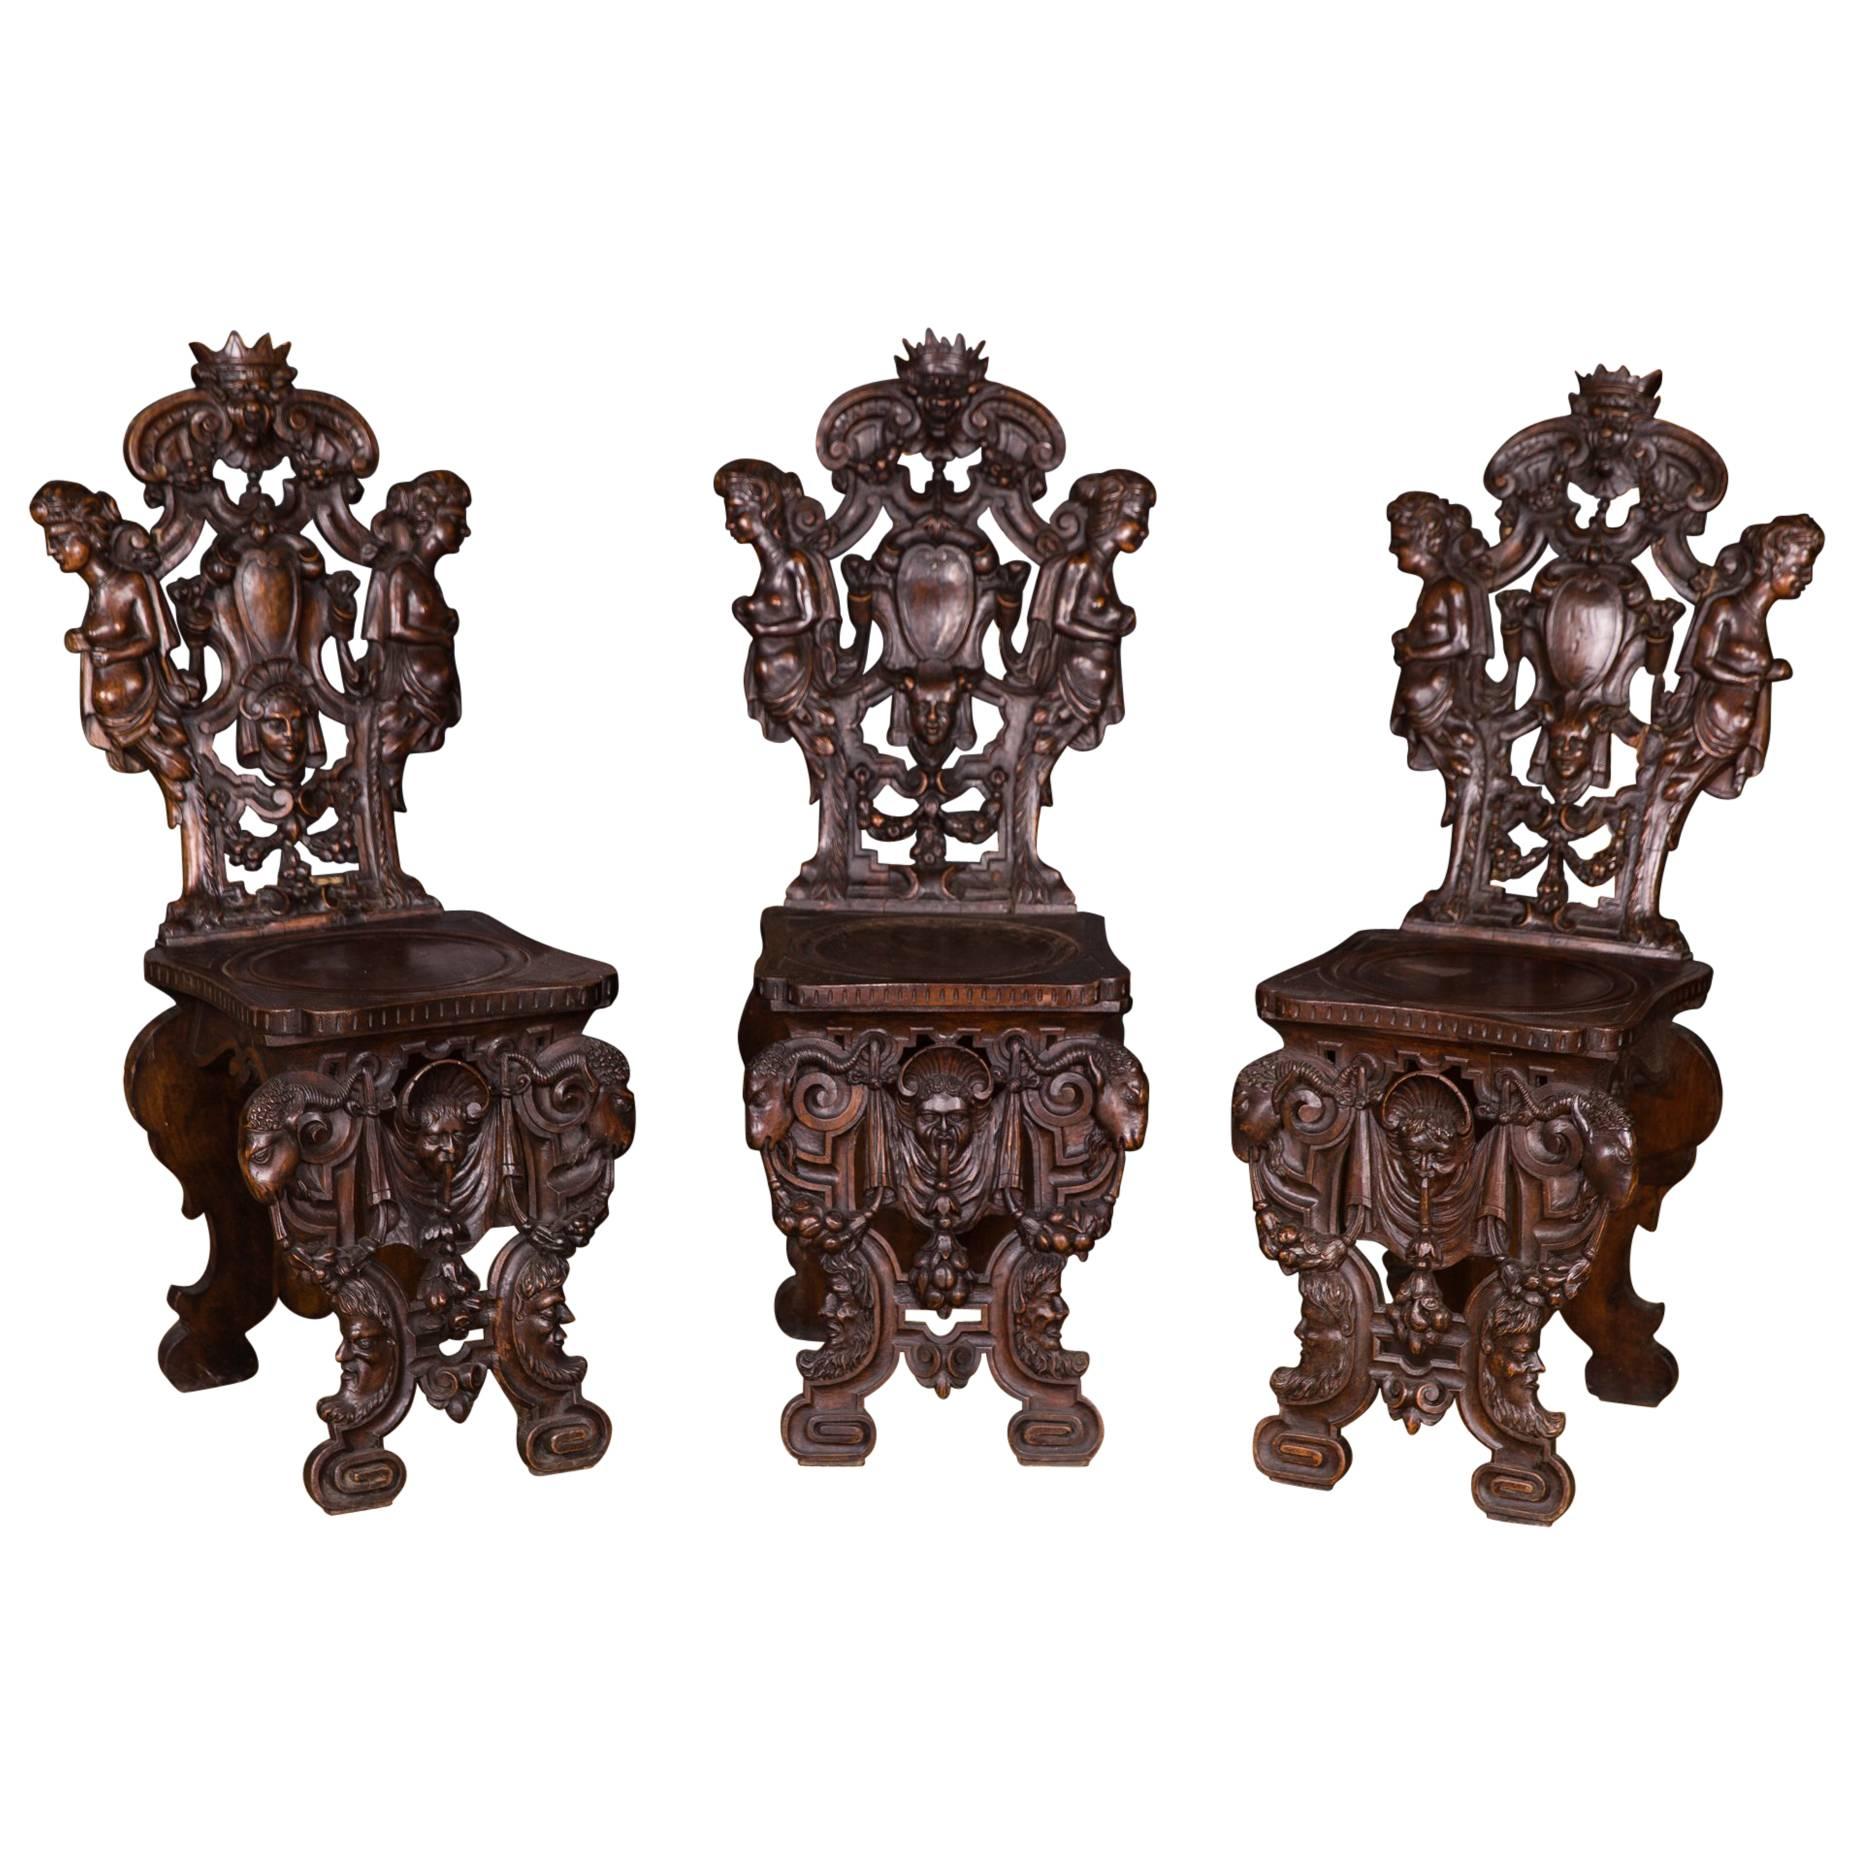 19th Century, Three Antique Neo-Renaissance Chairs from Venice 